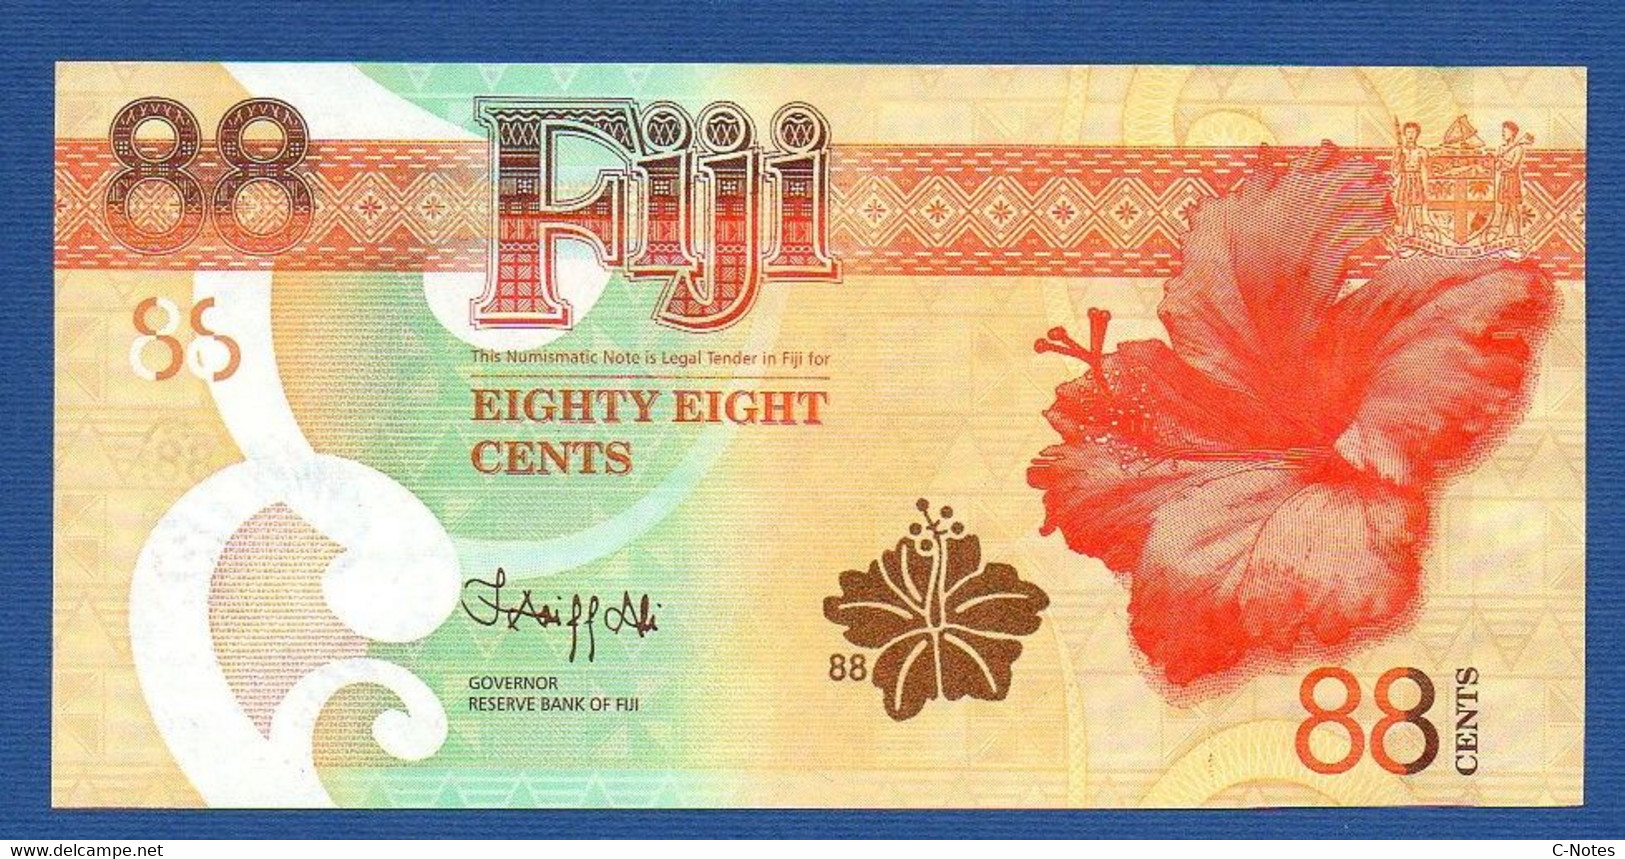 FIJI - P.W123 (1) – 88 Cents  ND (2022) UNC Serie AB19620231 "Numismatic Banknote 88 Cents" Commemorative Issue - Fidji